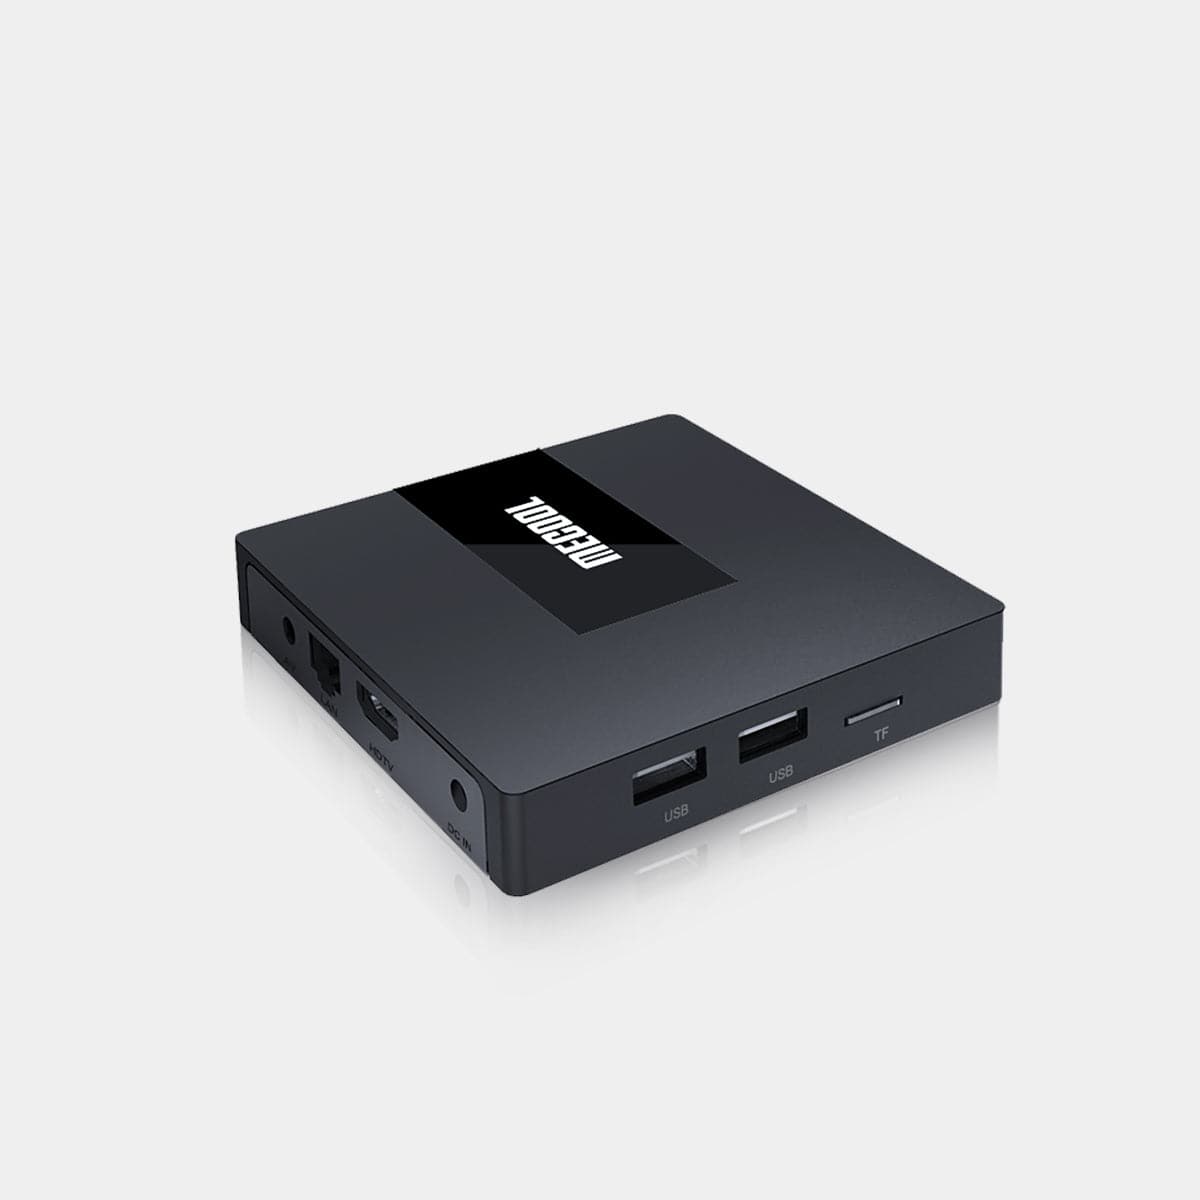 MECOOL KM7 Android TV Box